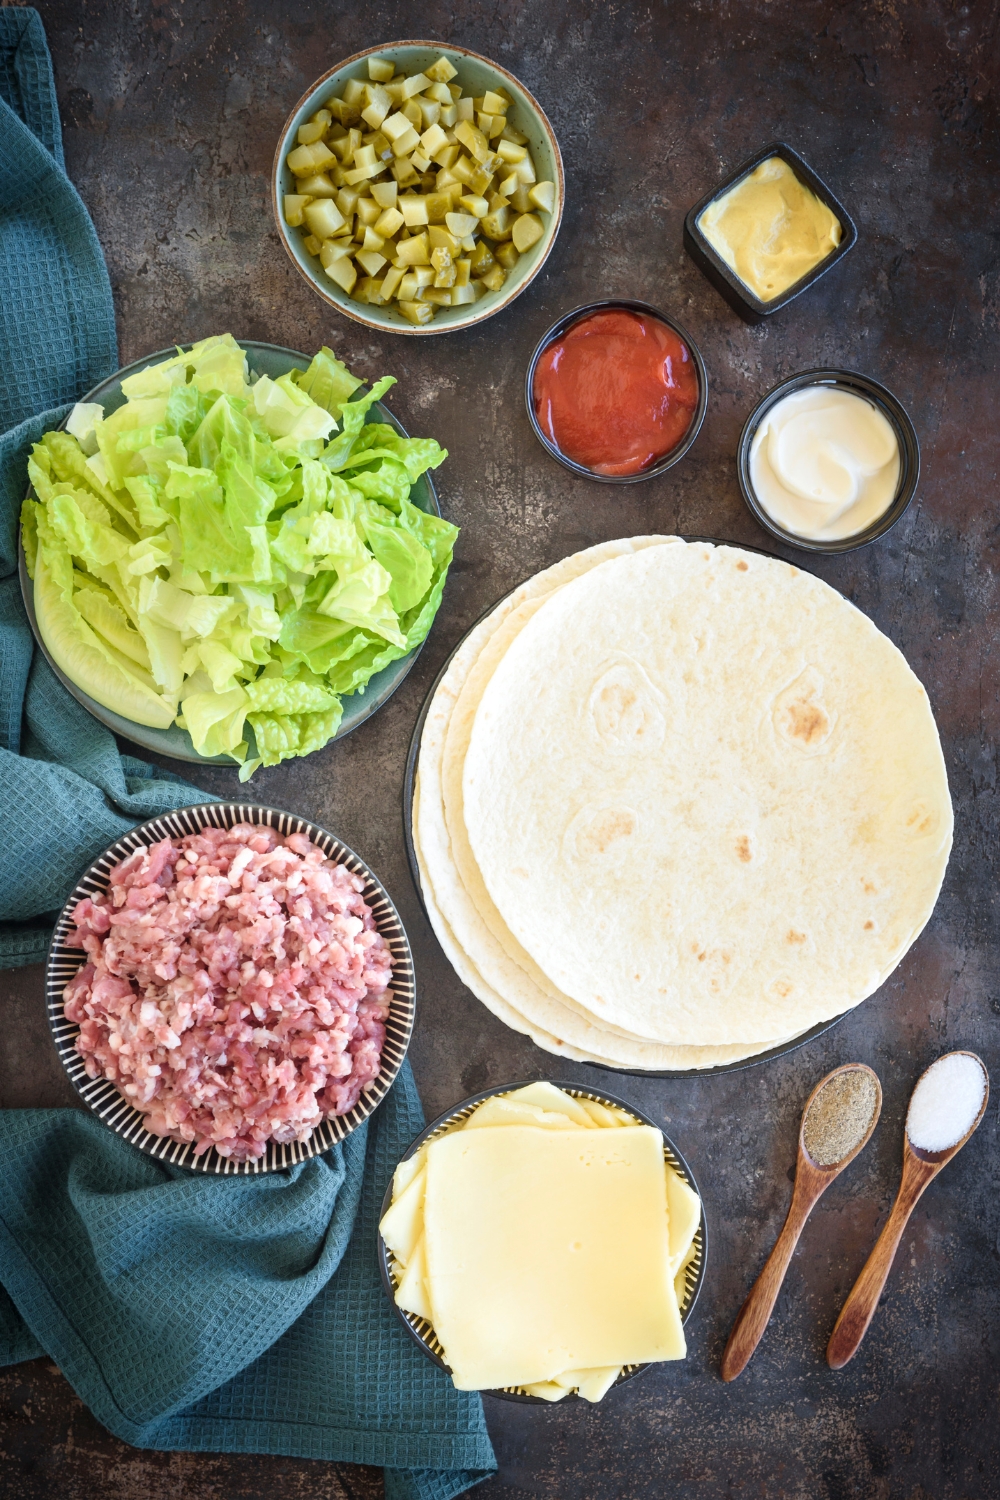 Diced pickles, condiments, shredded lettuce, ground meat, cheese, and tortillas are in separate bowls on a wooden table.